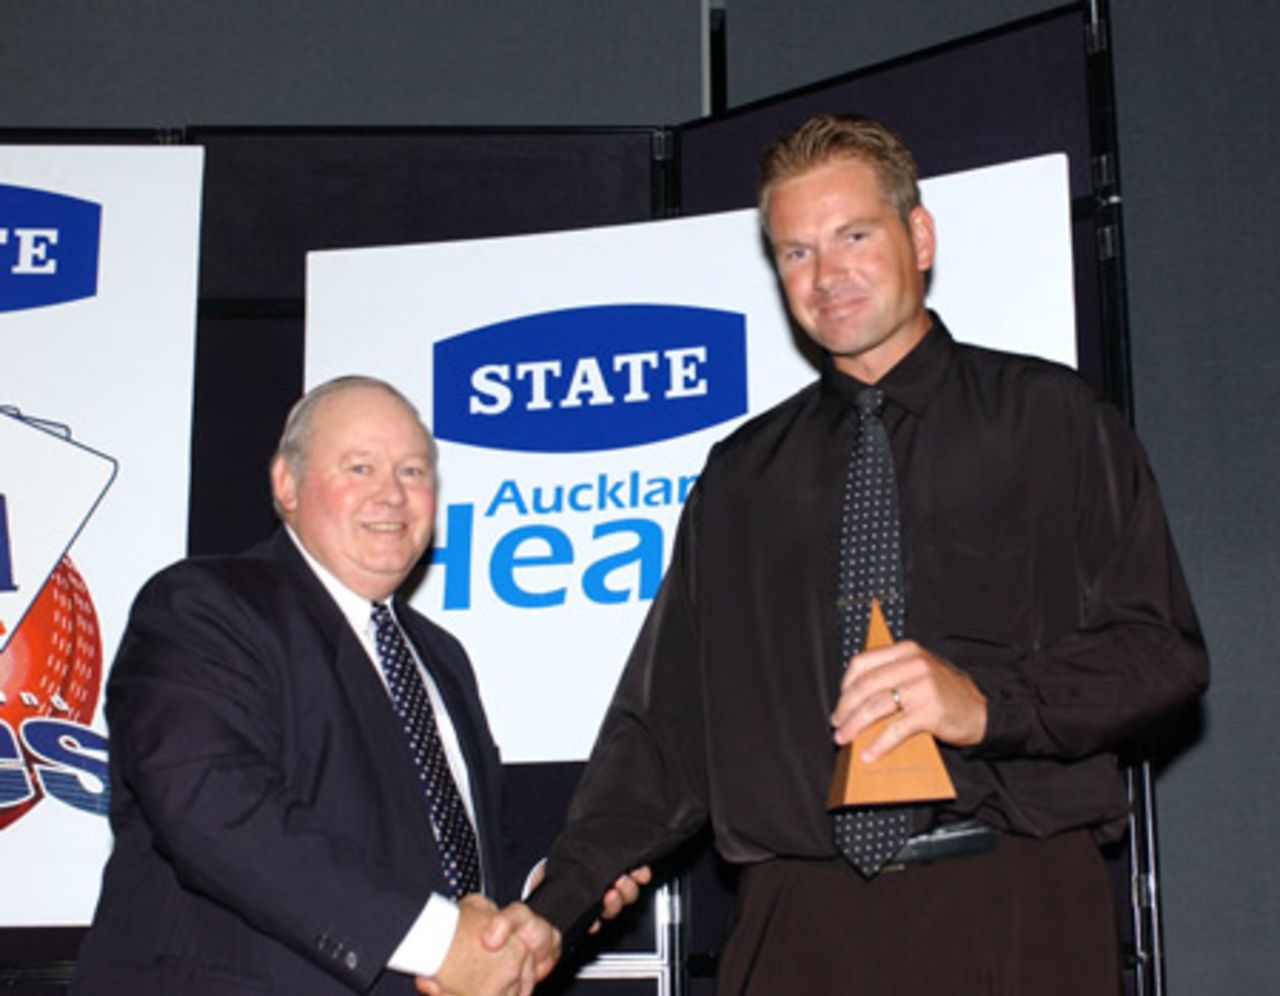 Auckland player Aaron Barnes (right) is presented the batsman of the year award by Auckland Cricket Association president Ray Hopkins. Auckland Cricket Association awards dinner at the ASB Bank Lounge, Eden Park, Auckland, 2 April 2003.